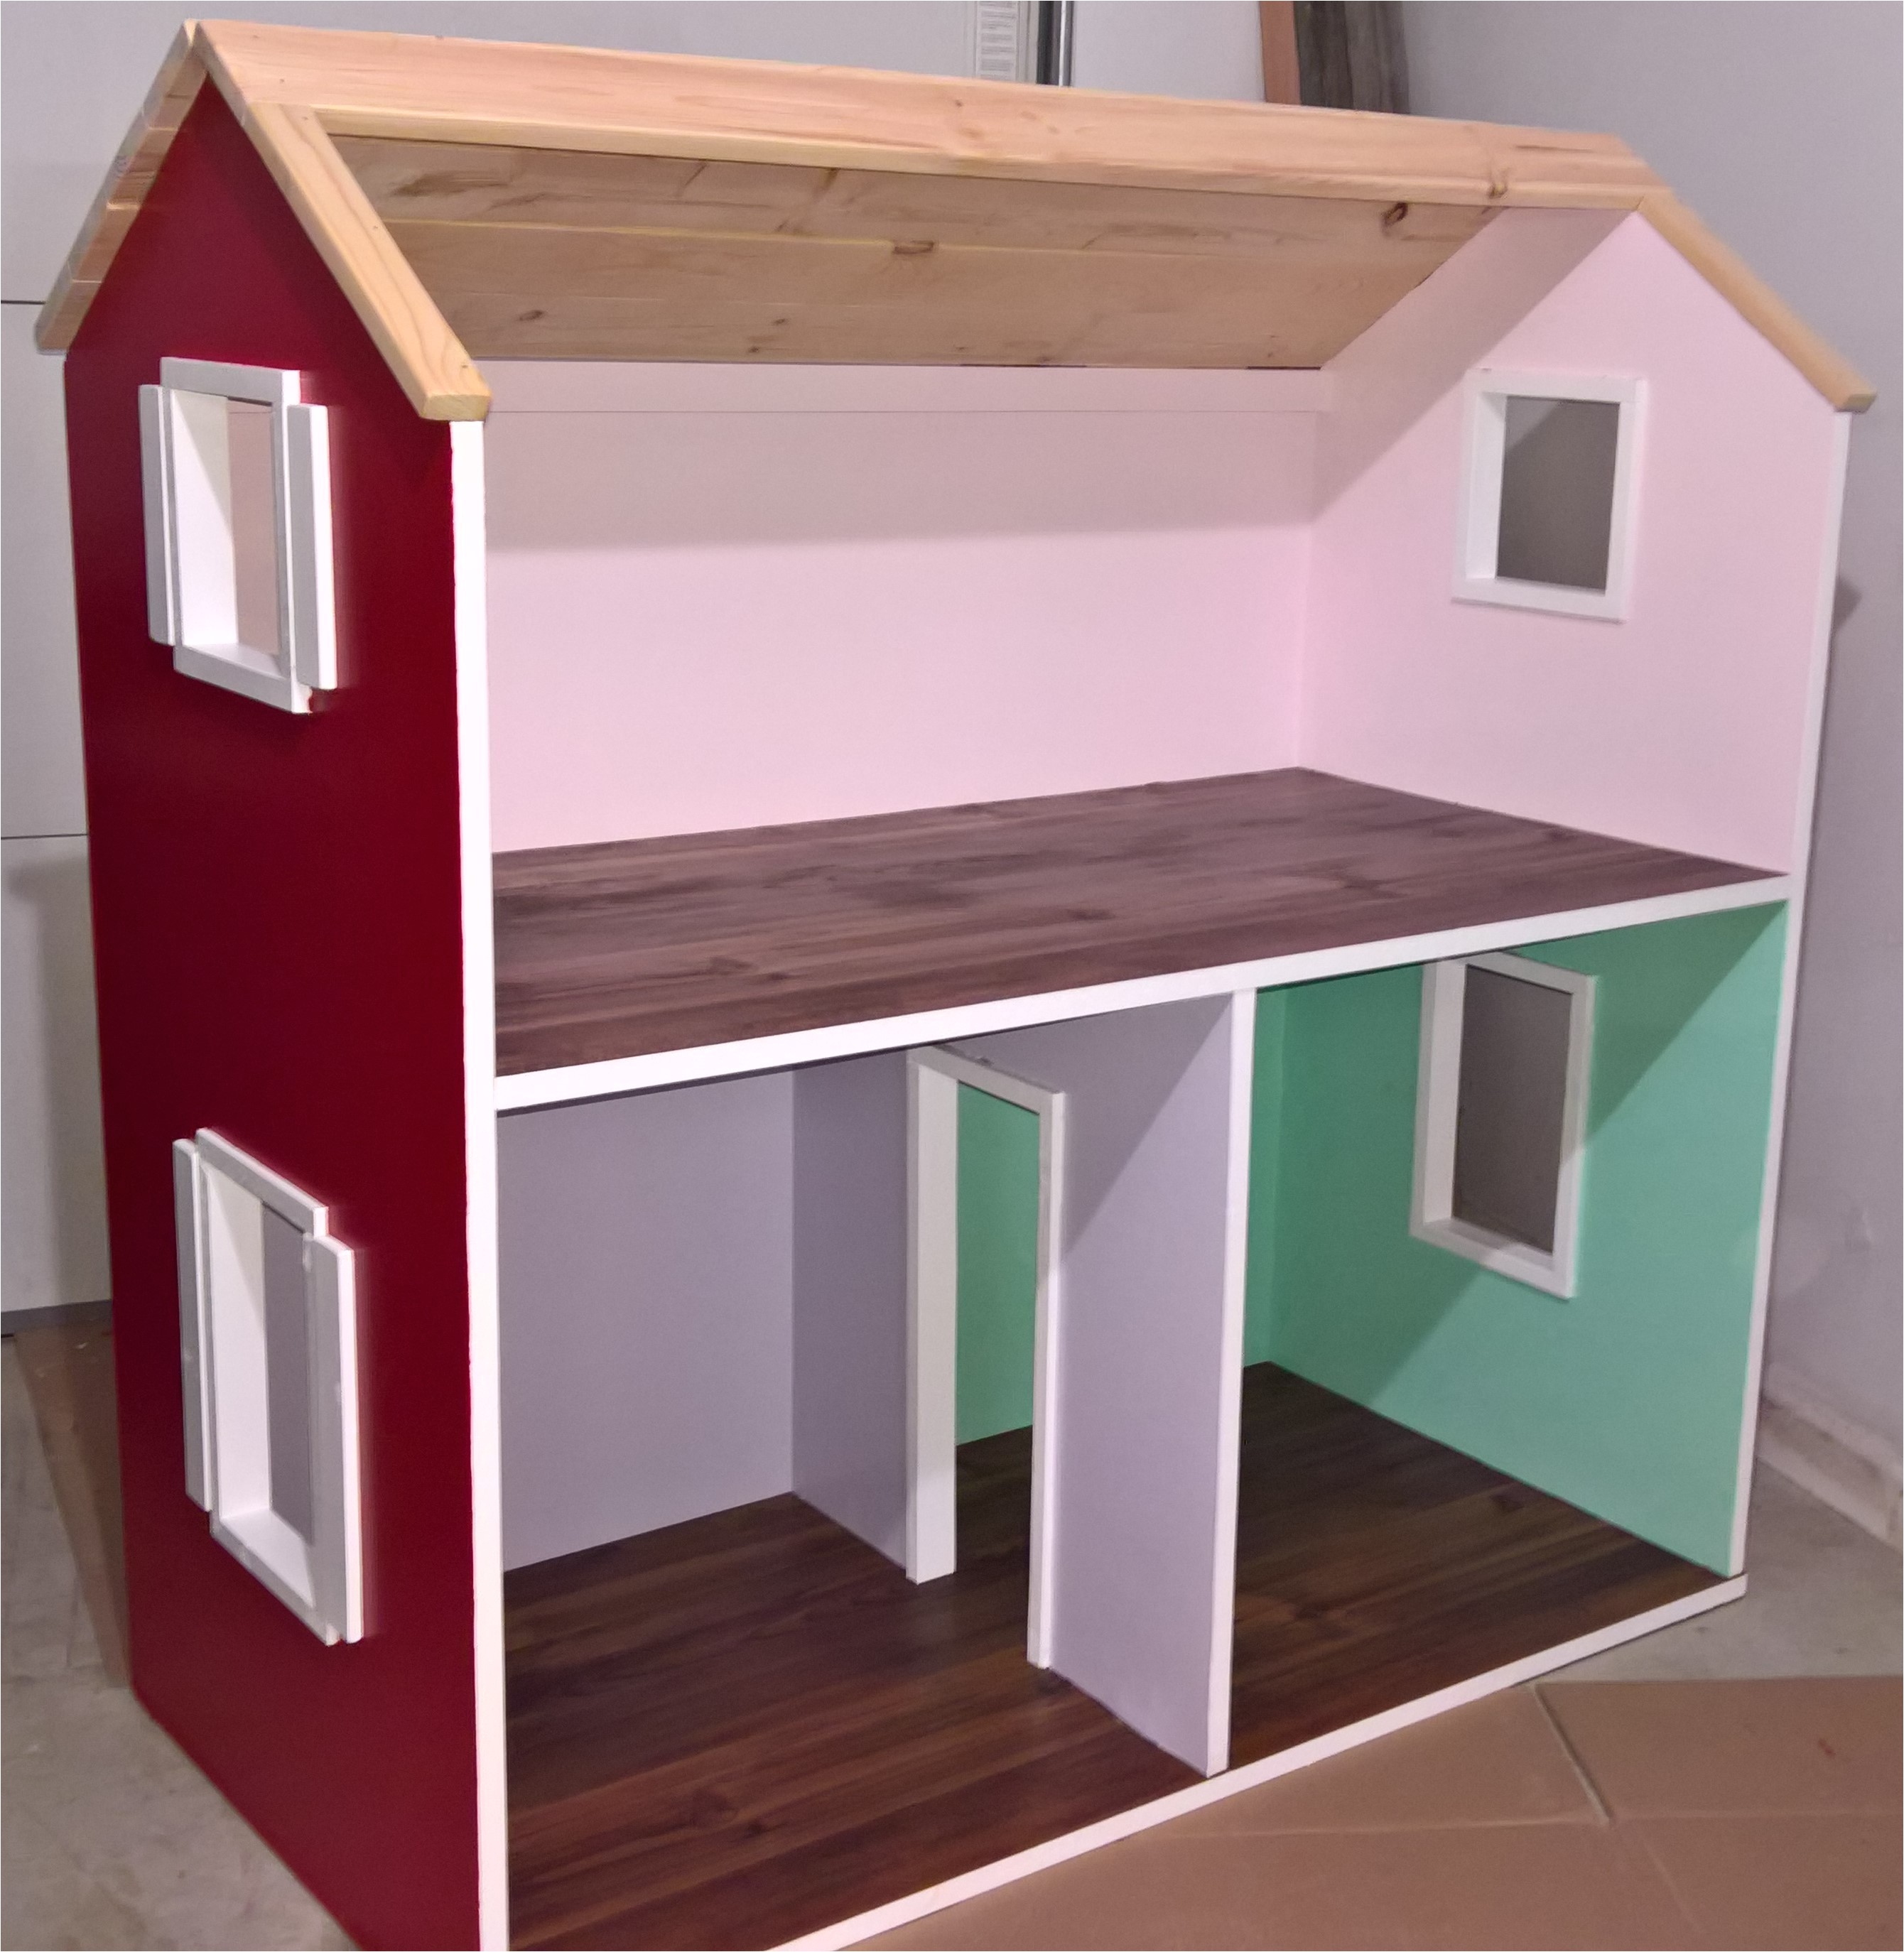 American Girl Doll House Plans Ana White 2 Story American Girl Dollhouse Diy Projects